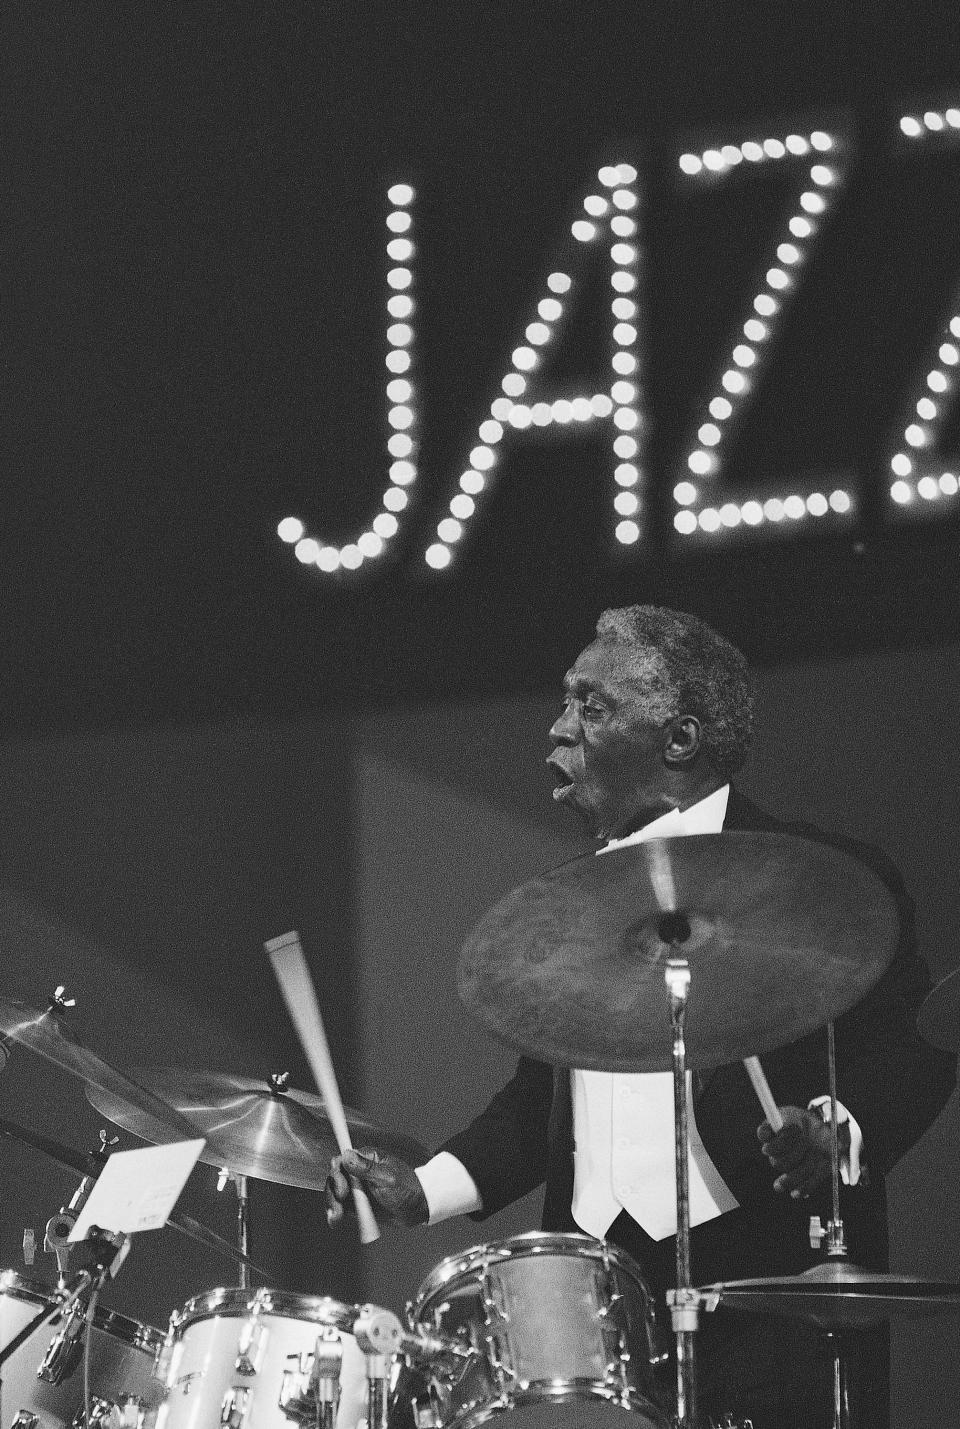 Drummer Art Blakey performs on opening night of the Kool Jazz Festival at Carnegie Hall Friday, June 27, 1981. His group is called The Jazz Messengers.